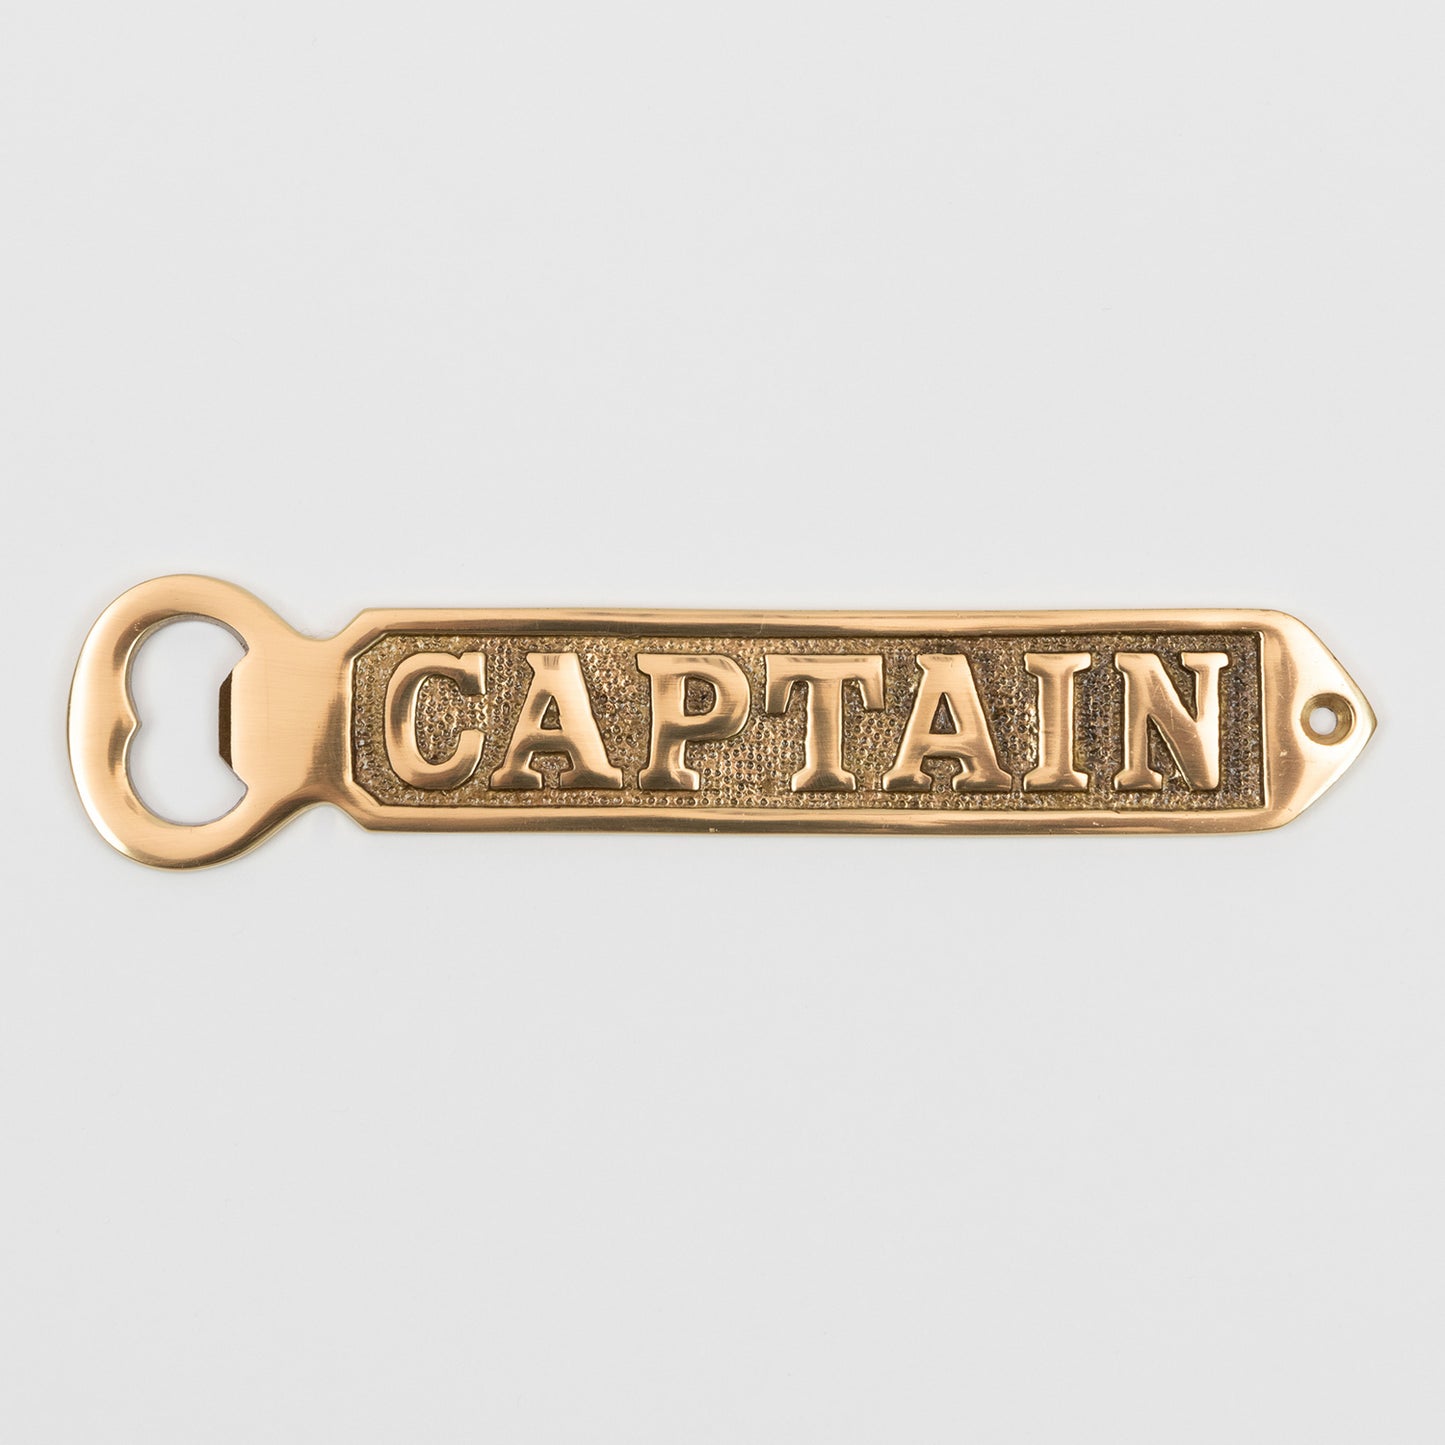 A solid brass bottle opener with 'Captain' written on it. Photographed on a white background.